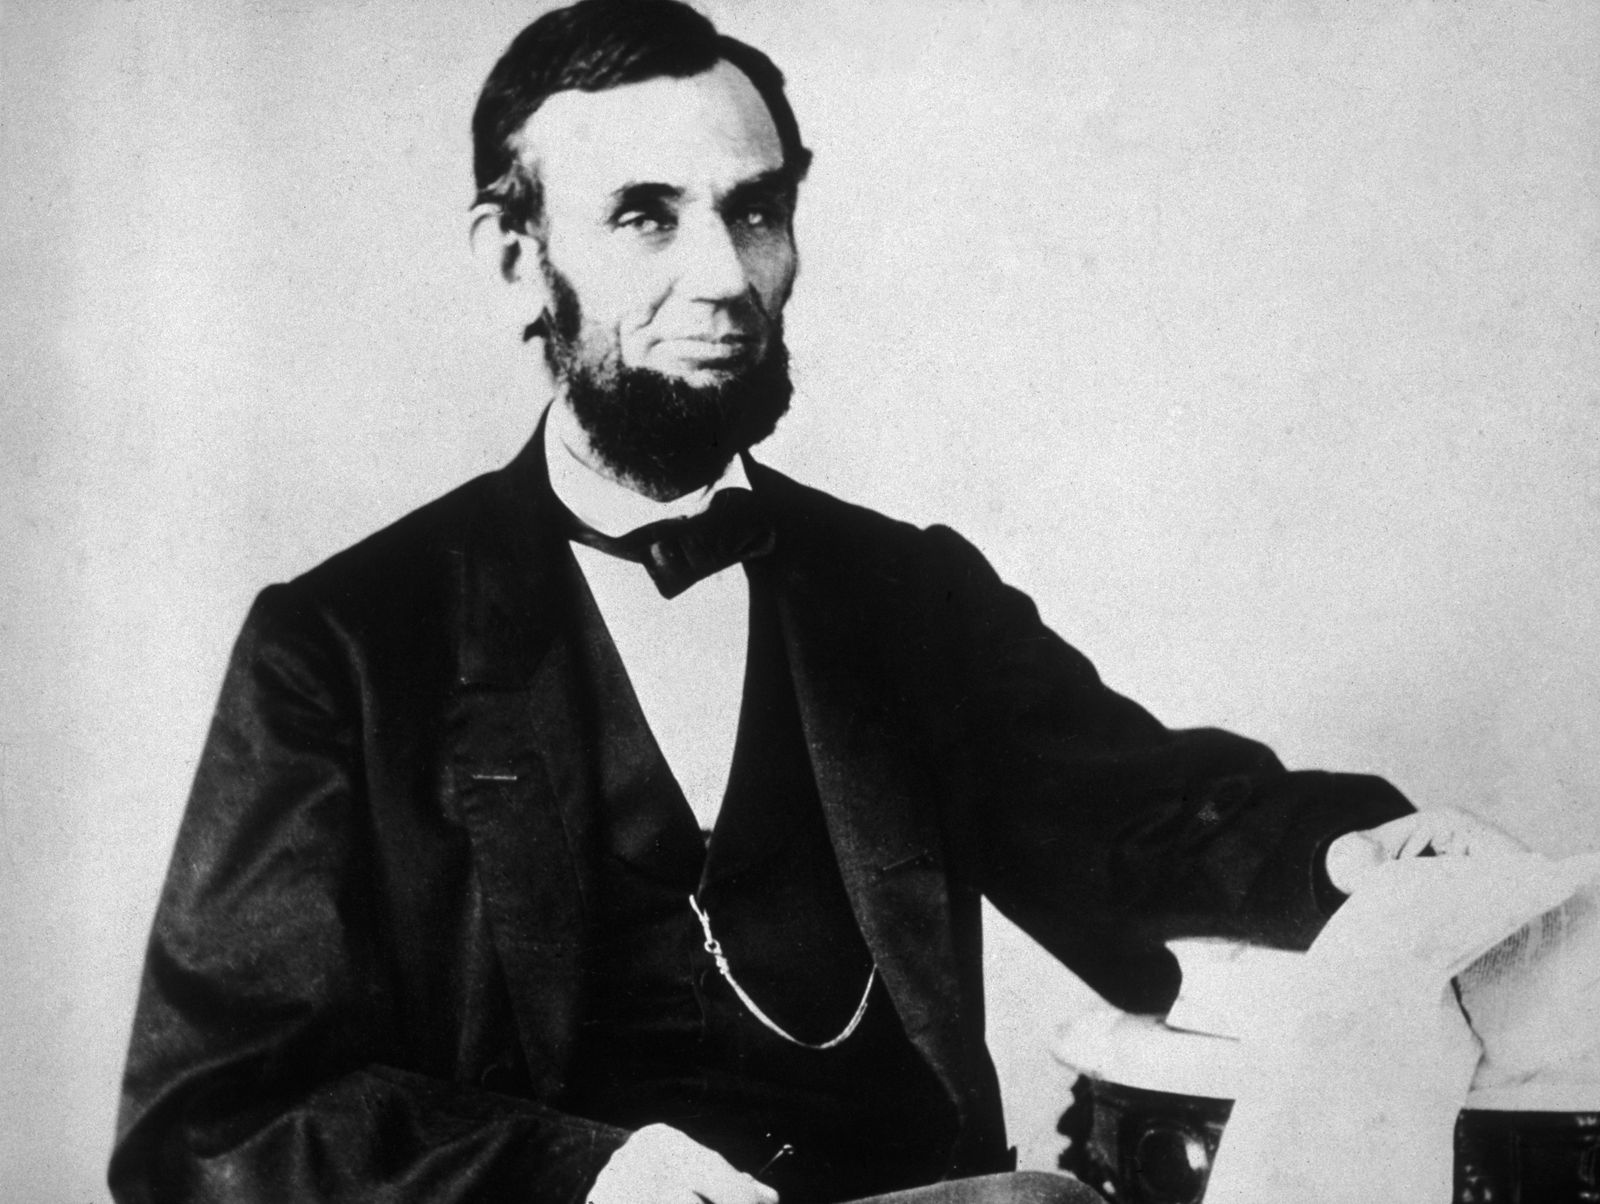 Abraham Lincoln Pardoned Joe Biden's Great-Great-Grandfather, 160-Year-Old Records Reveal